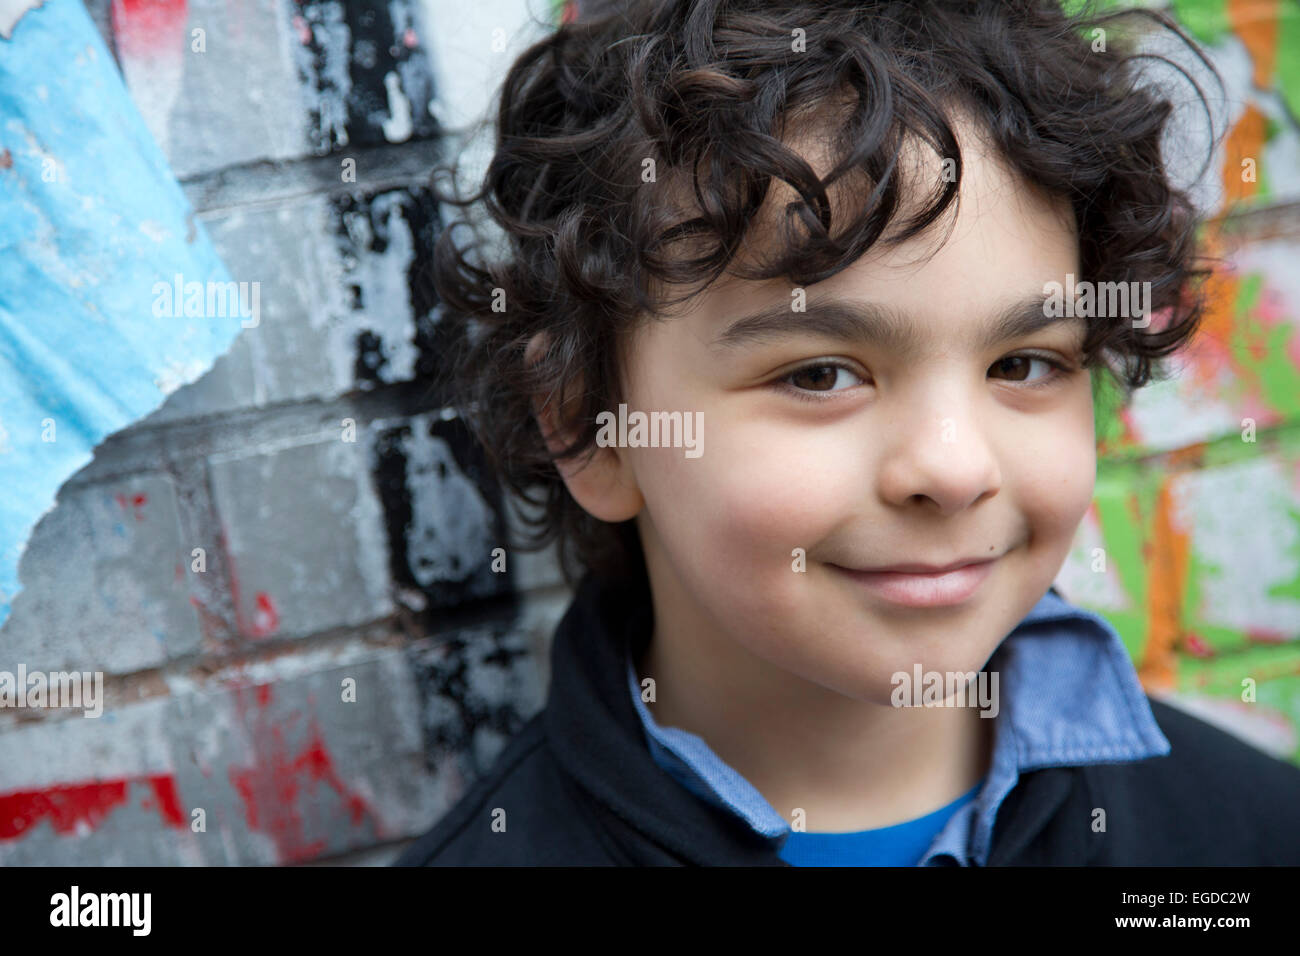 7 year old boy hanging out in Brick Lane East London Stock Photo